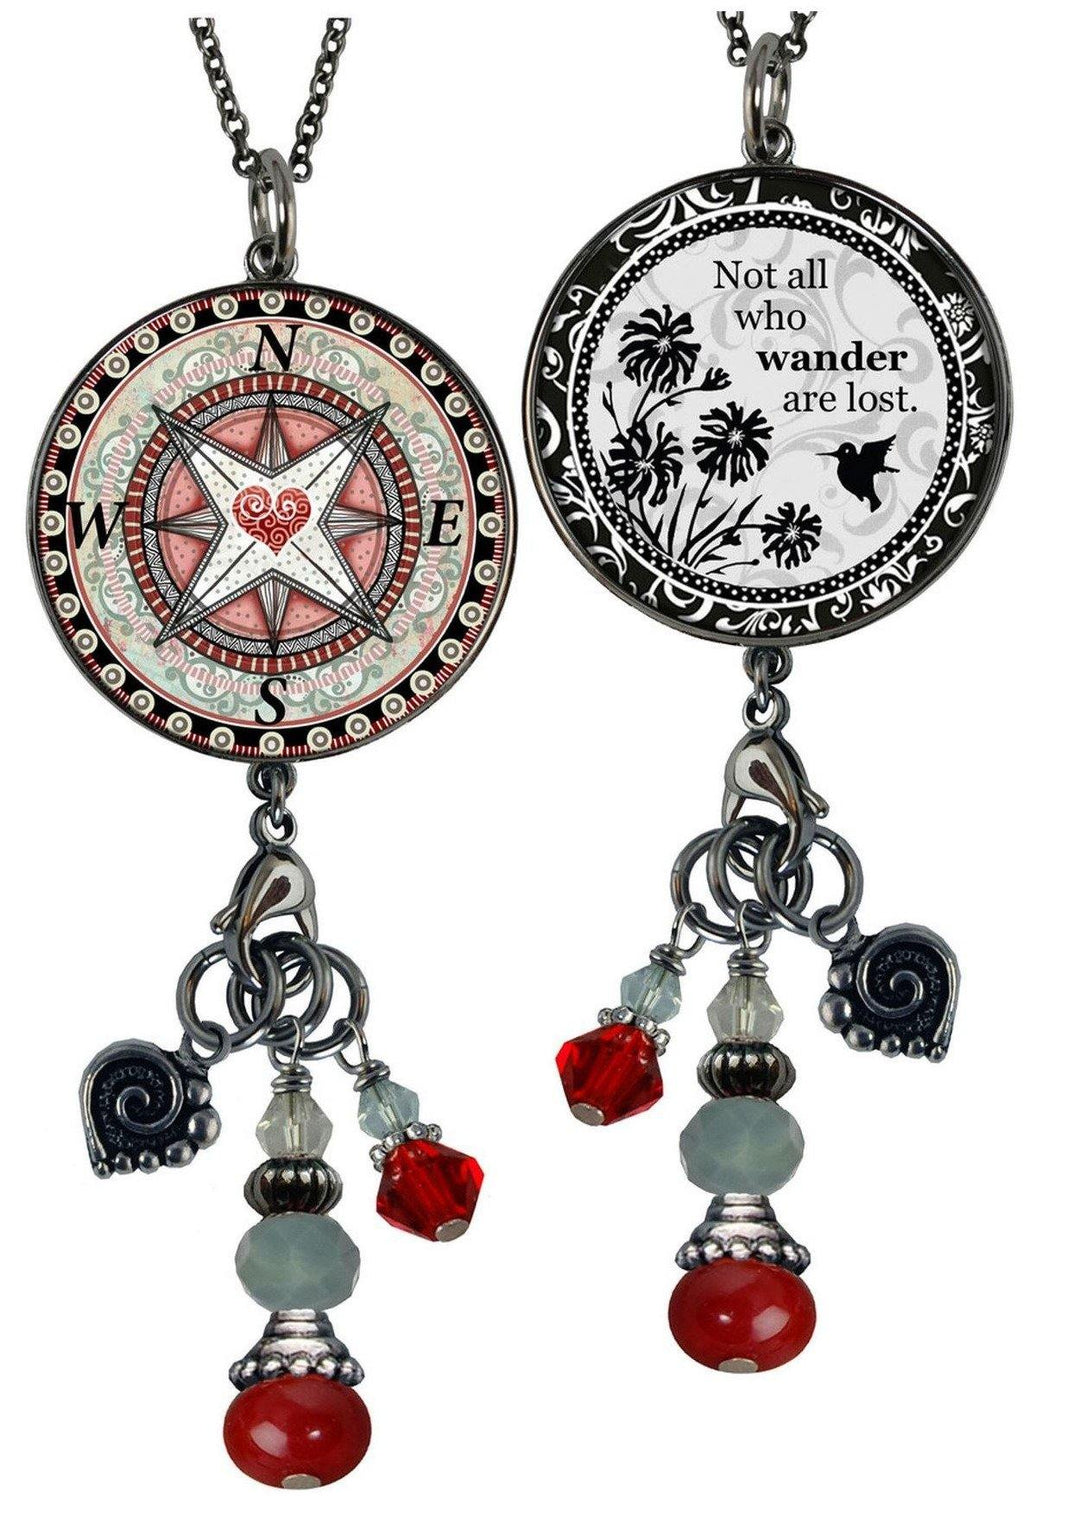 Brand: Spirit LaLa - Red Crystal Reversible Dangle Compass Inspirational Necklace -  BoHo, Compass, Gift Idea, Inspirational quote, Jewelry, jewelry made in USA, Made in America, made in usa, Made Local, Necklace, Pendant, Statement Necklace, Women - Classy Cozy Cool Boutique